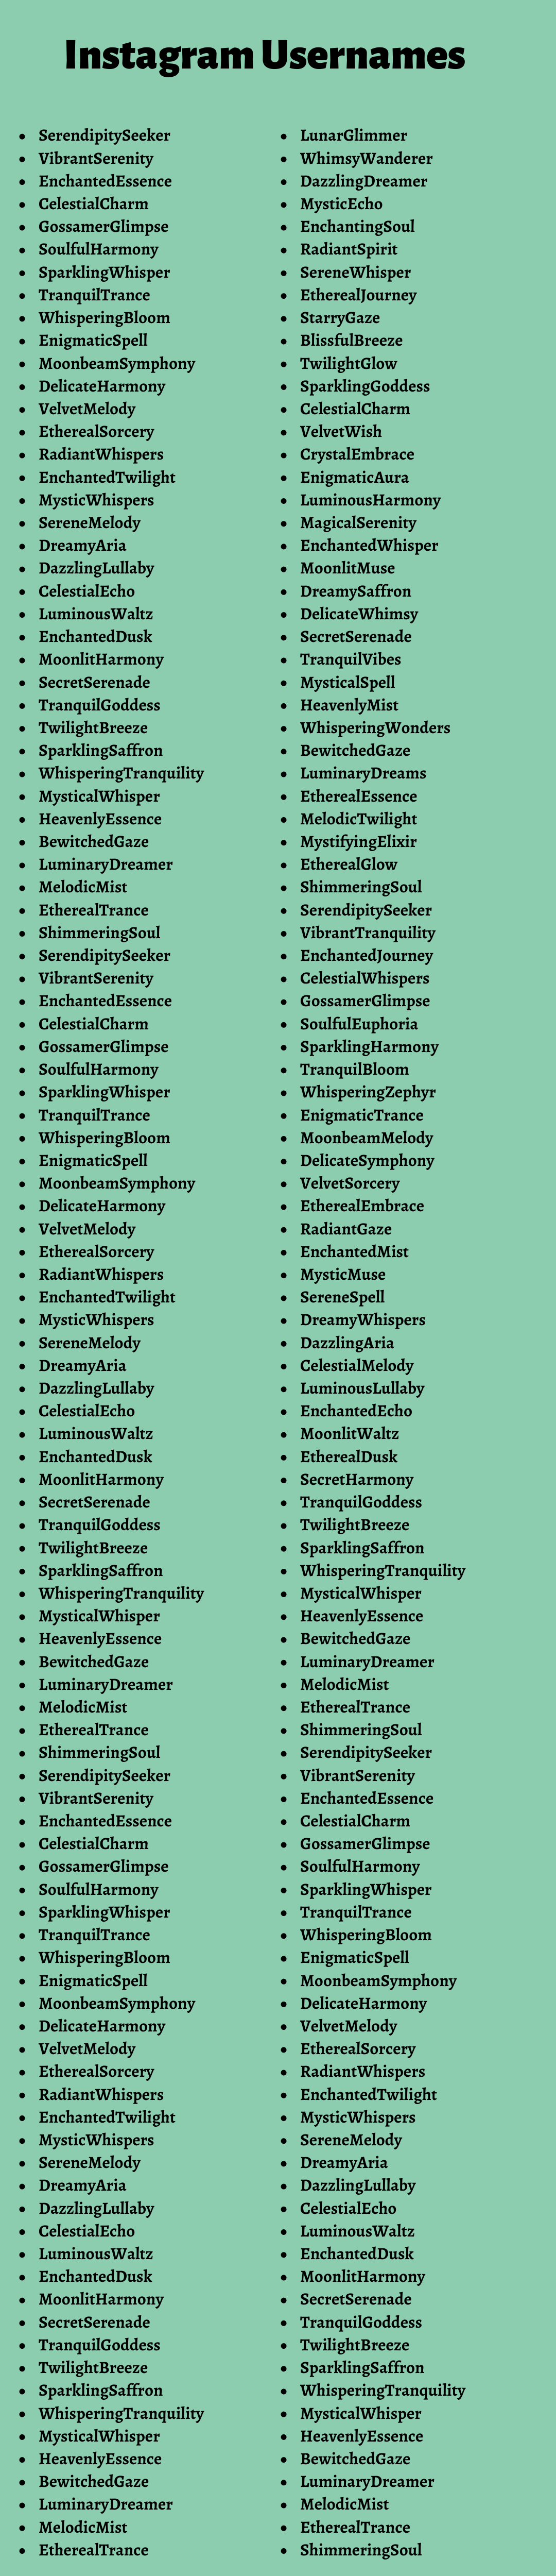 600+ Best Instagram Usernames Ideas That are Cool, Funny and Unique